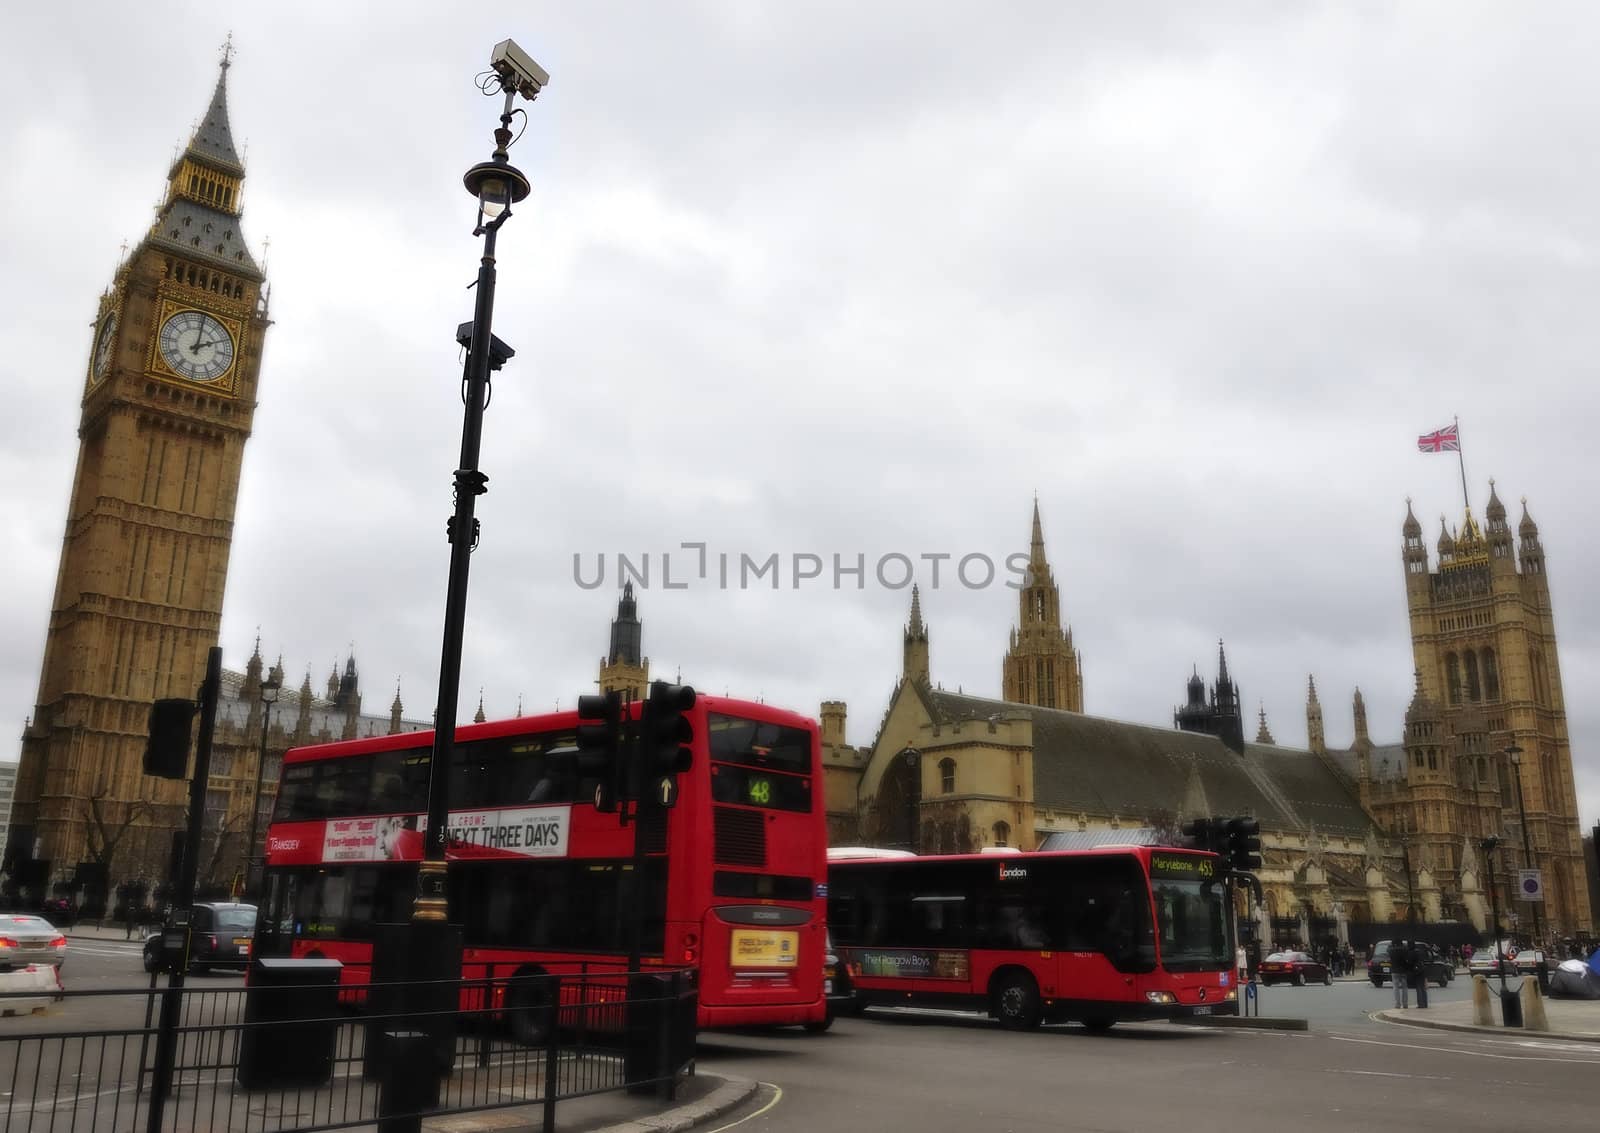 UK parliament, full view. With people and the classic red bus.